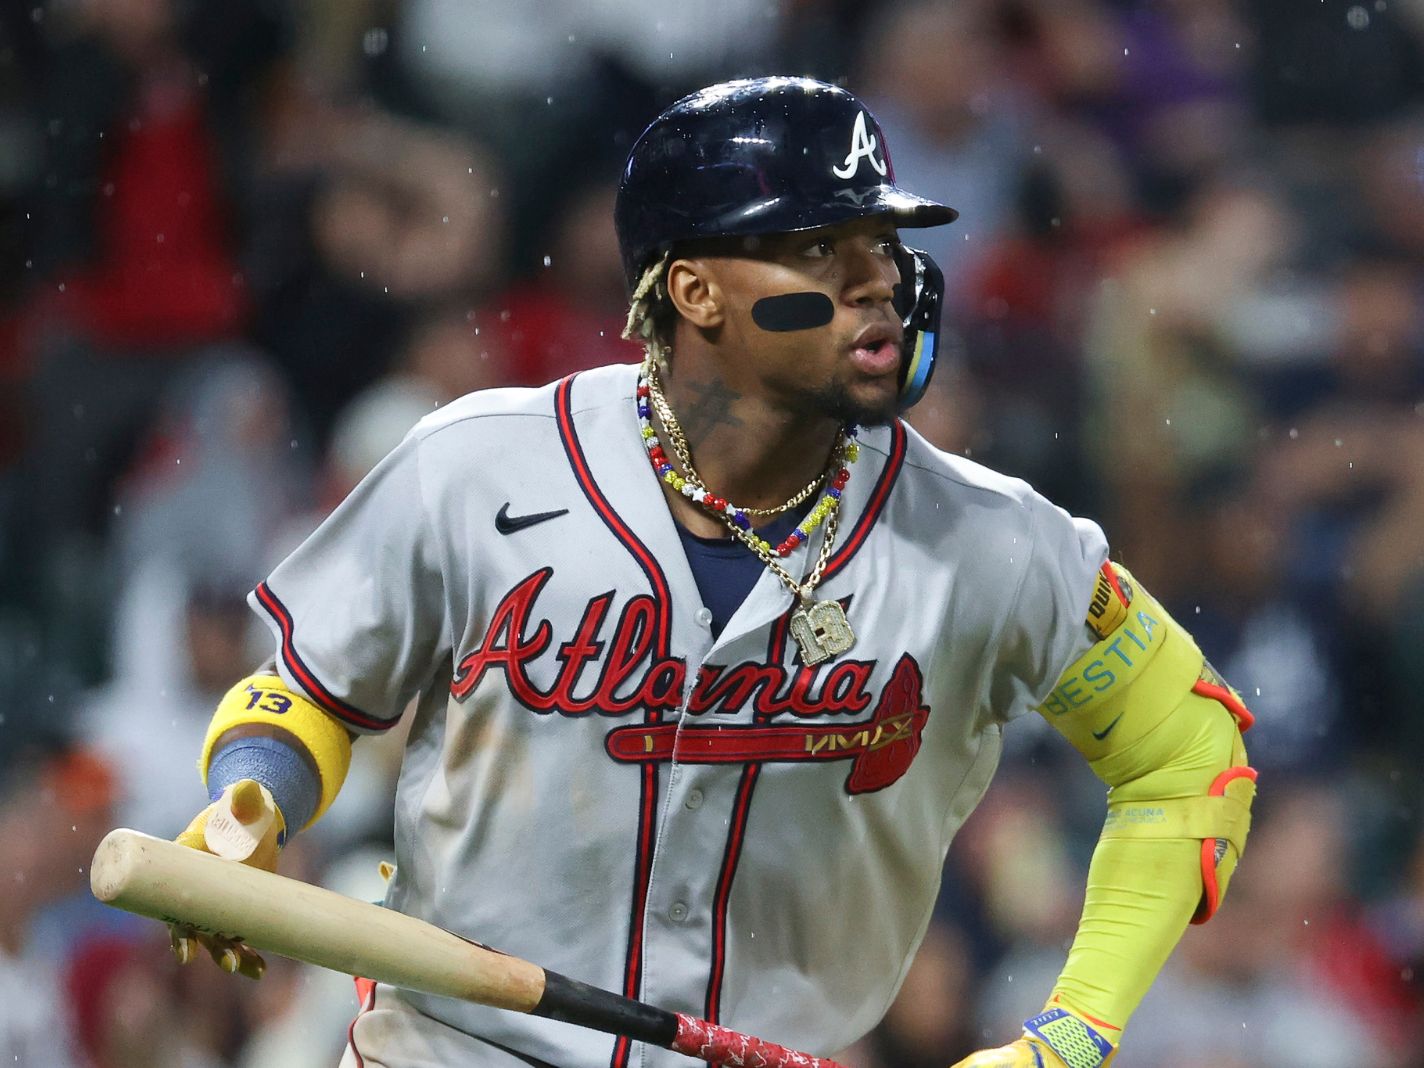 Ronald Acuna of the Atlanta Braves Just Did Something That No